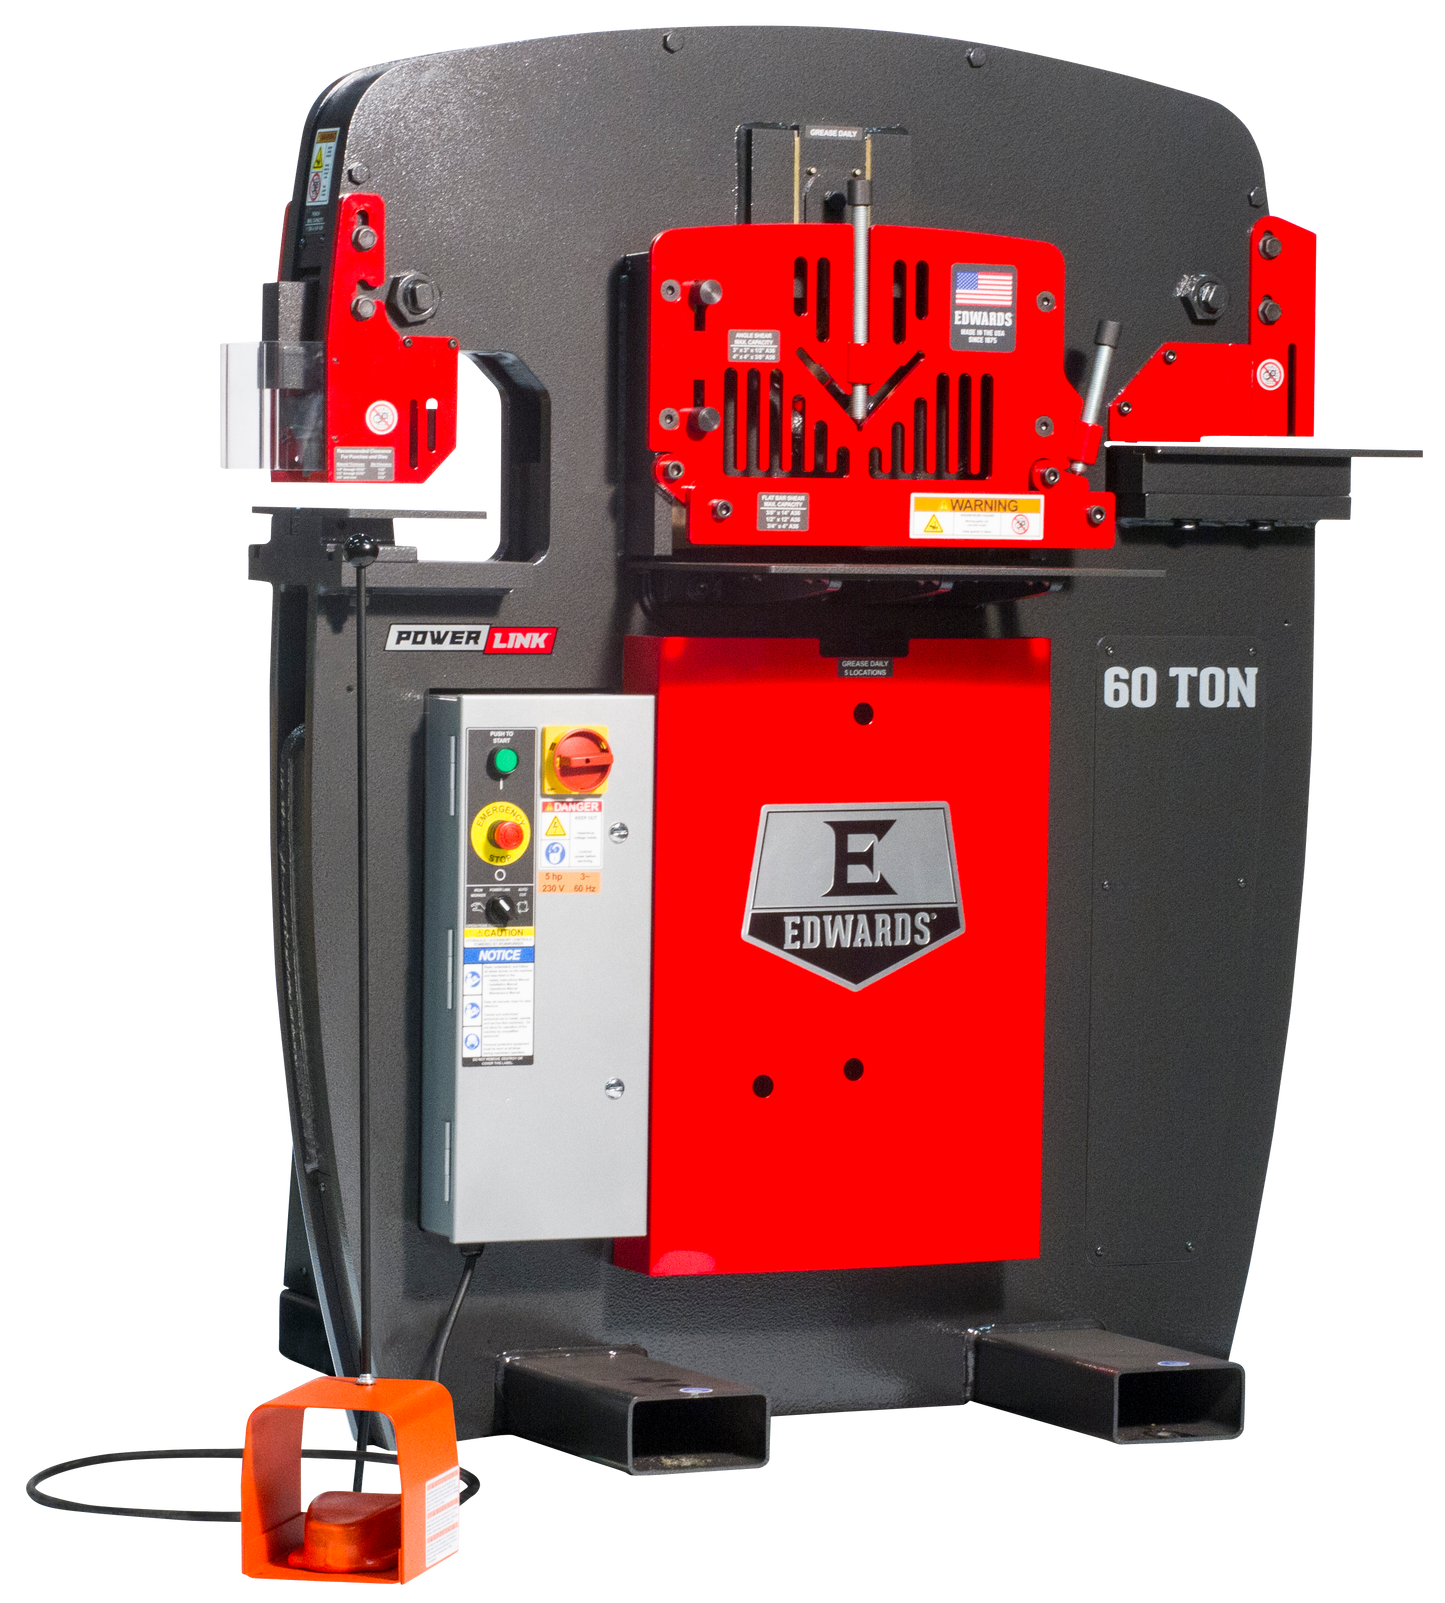 60 Ton Ironworker Int'l - 3 Ph, 380 V, 50 Hz with PowerLink